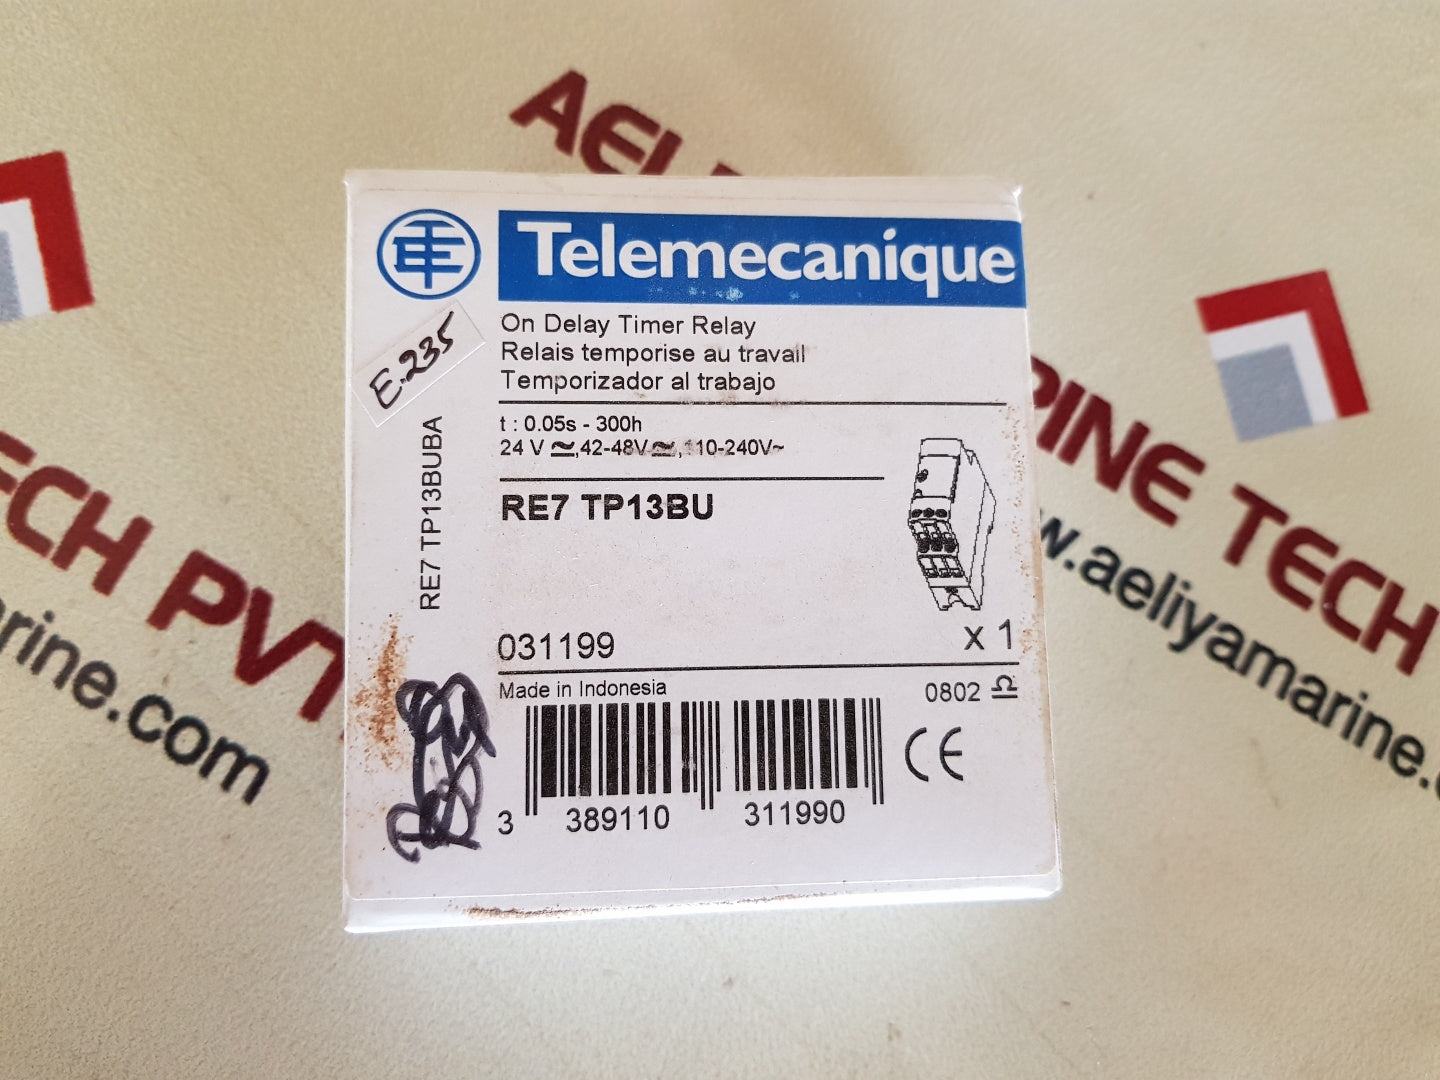 Telemecanique/scheider electric re7 tp13bu on delay timer relay